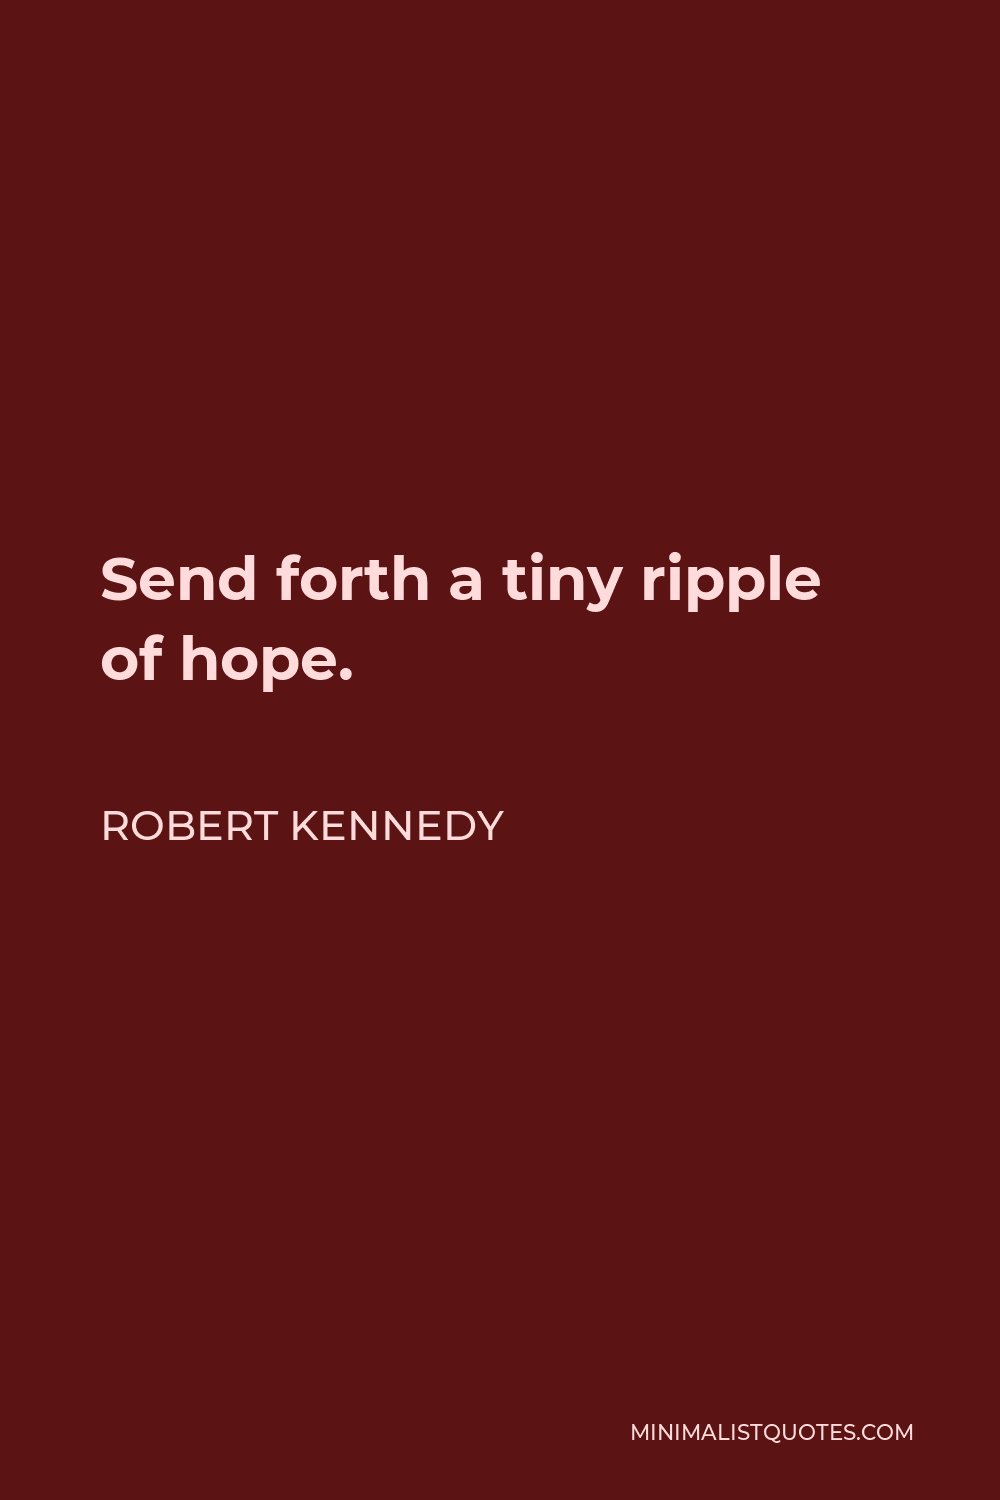 Robert Kennedy Quote - Send forth a tiny ripple of hope.